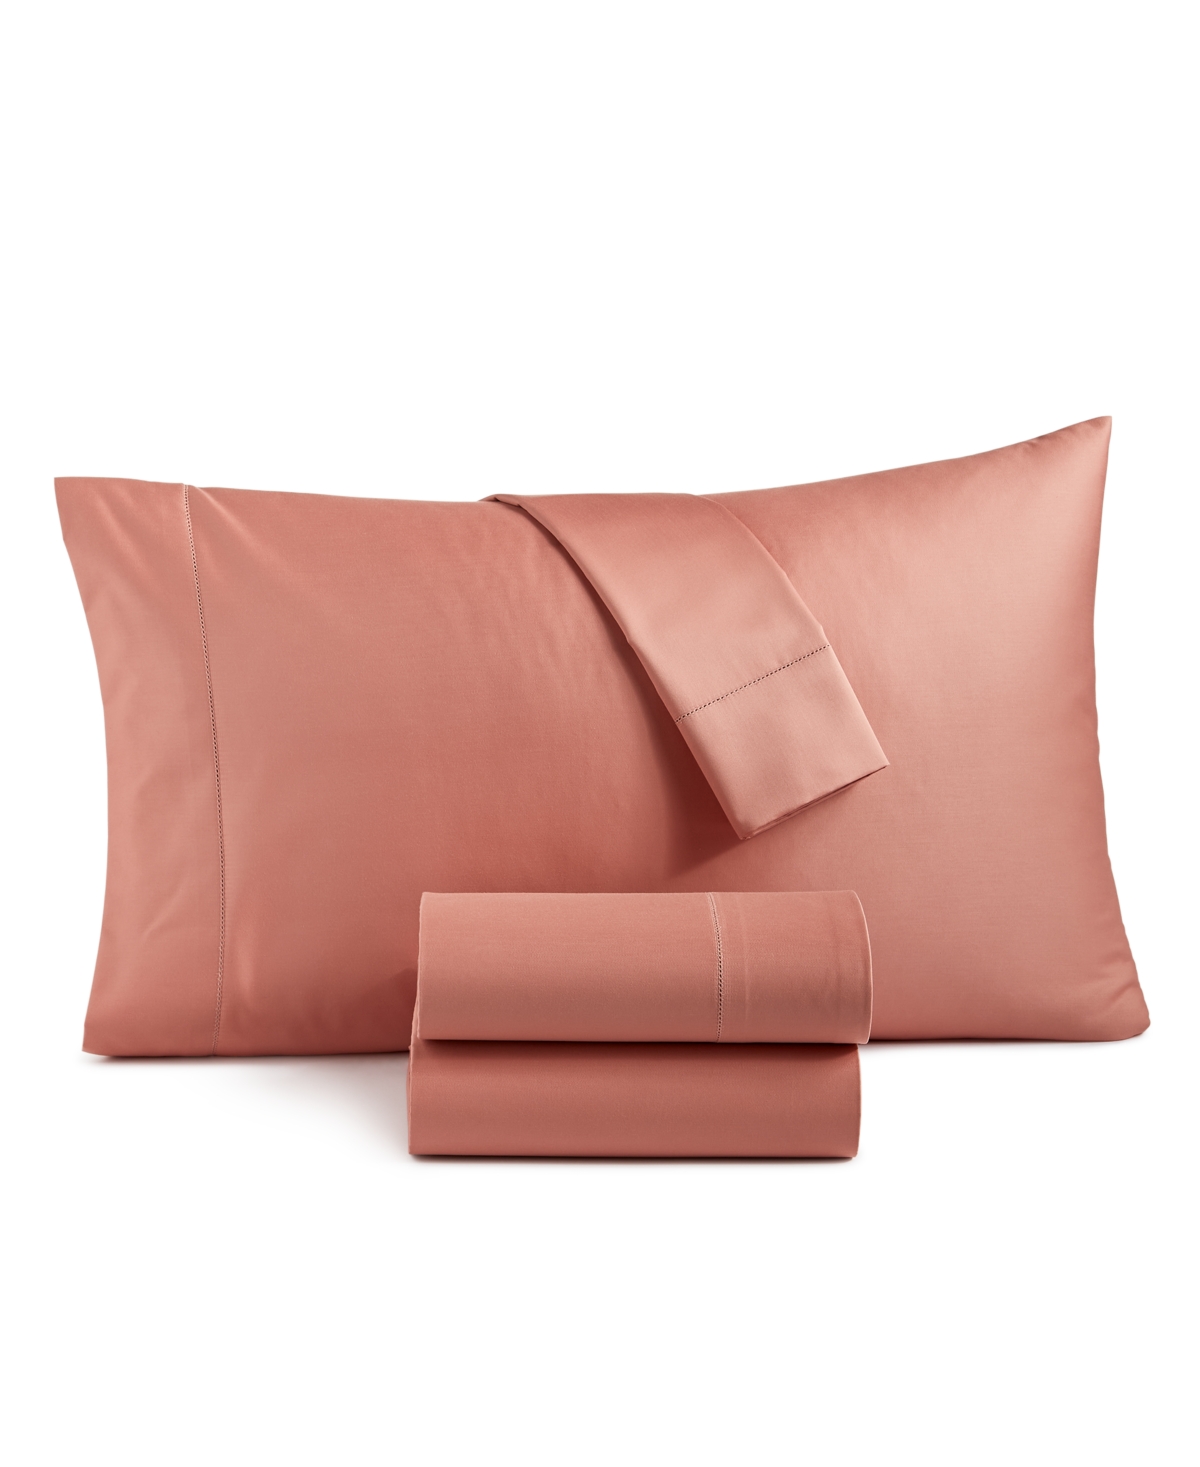 Charter Club Damask Solid 550 Thread Count 100% Cotton 3-pc. Sheet Set, Twin, Created For Macy's In Baked Clay